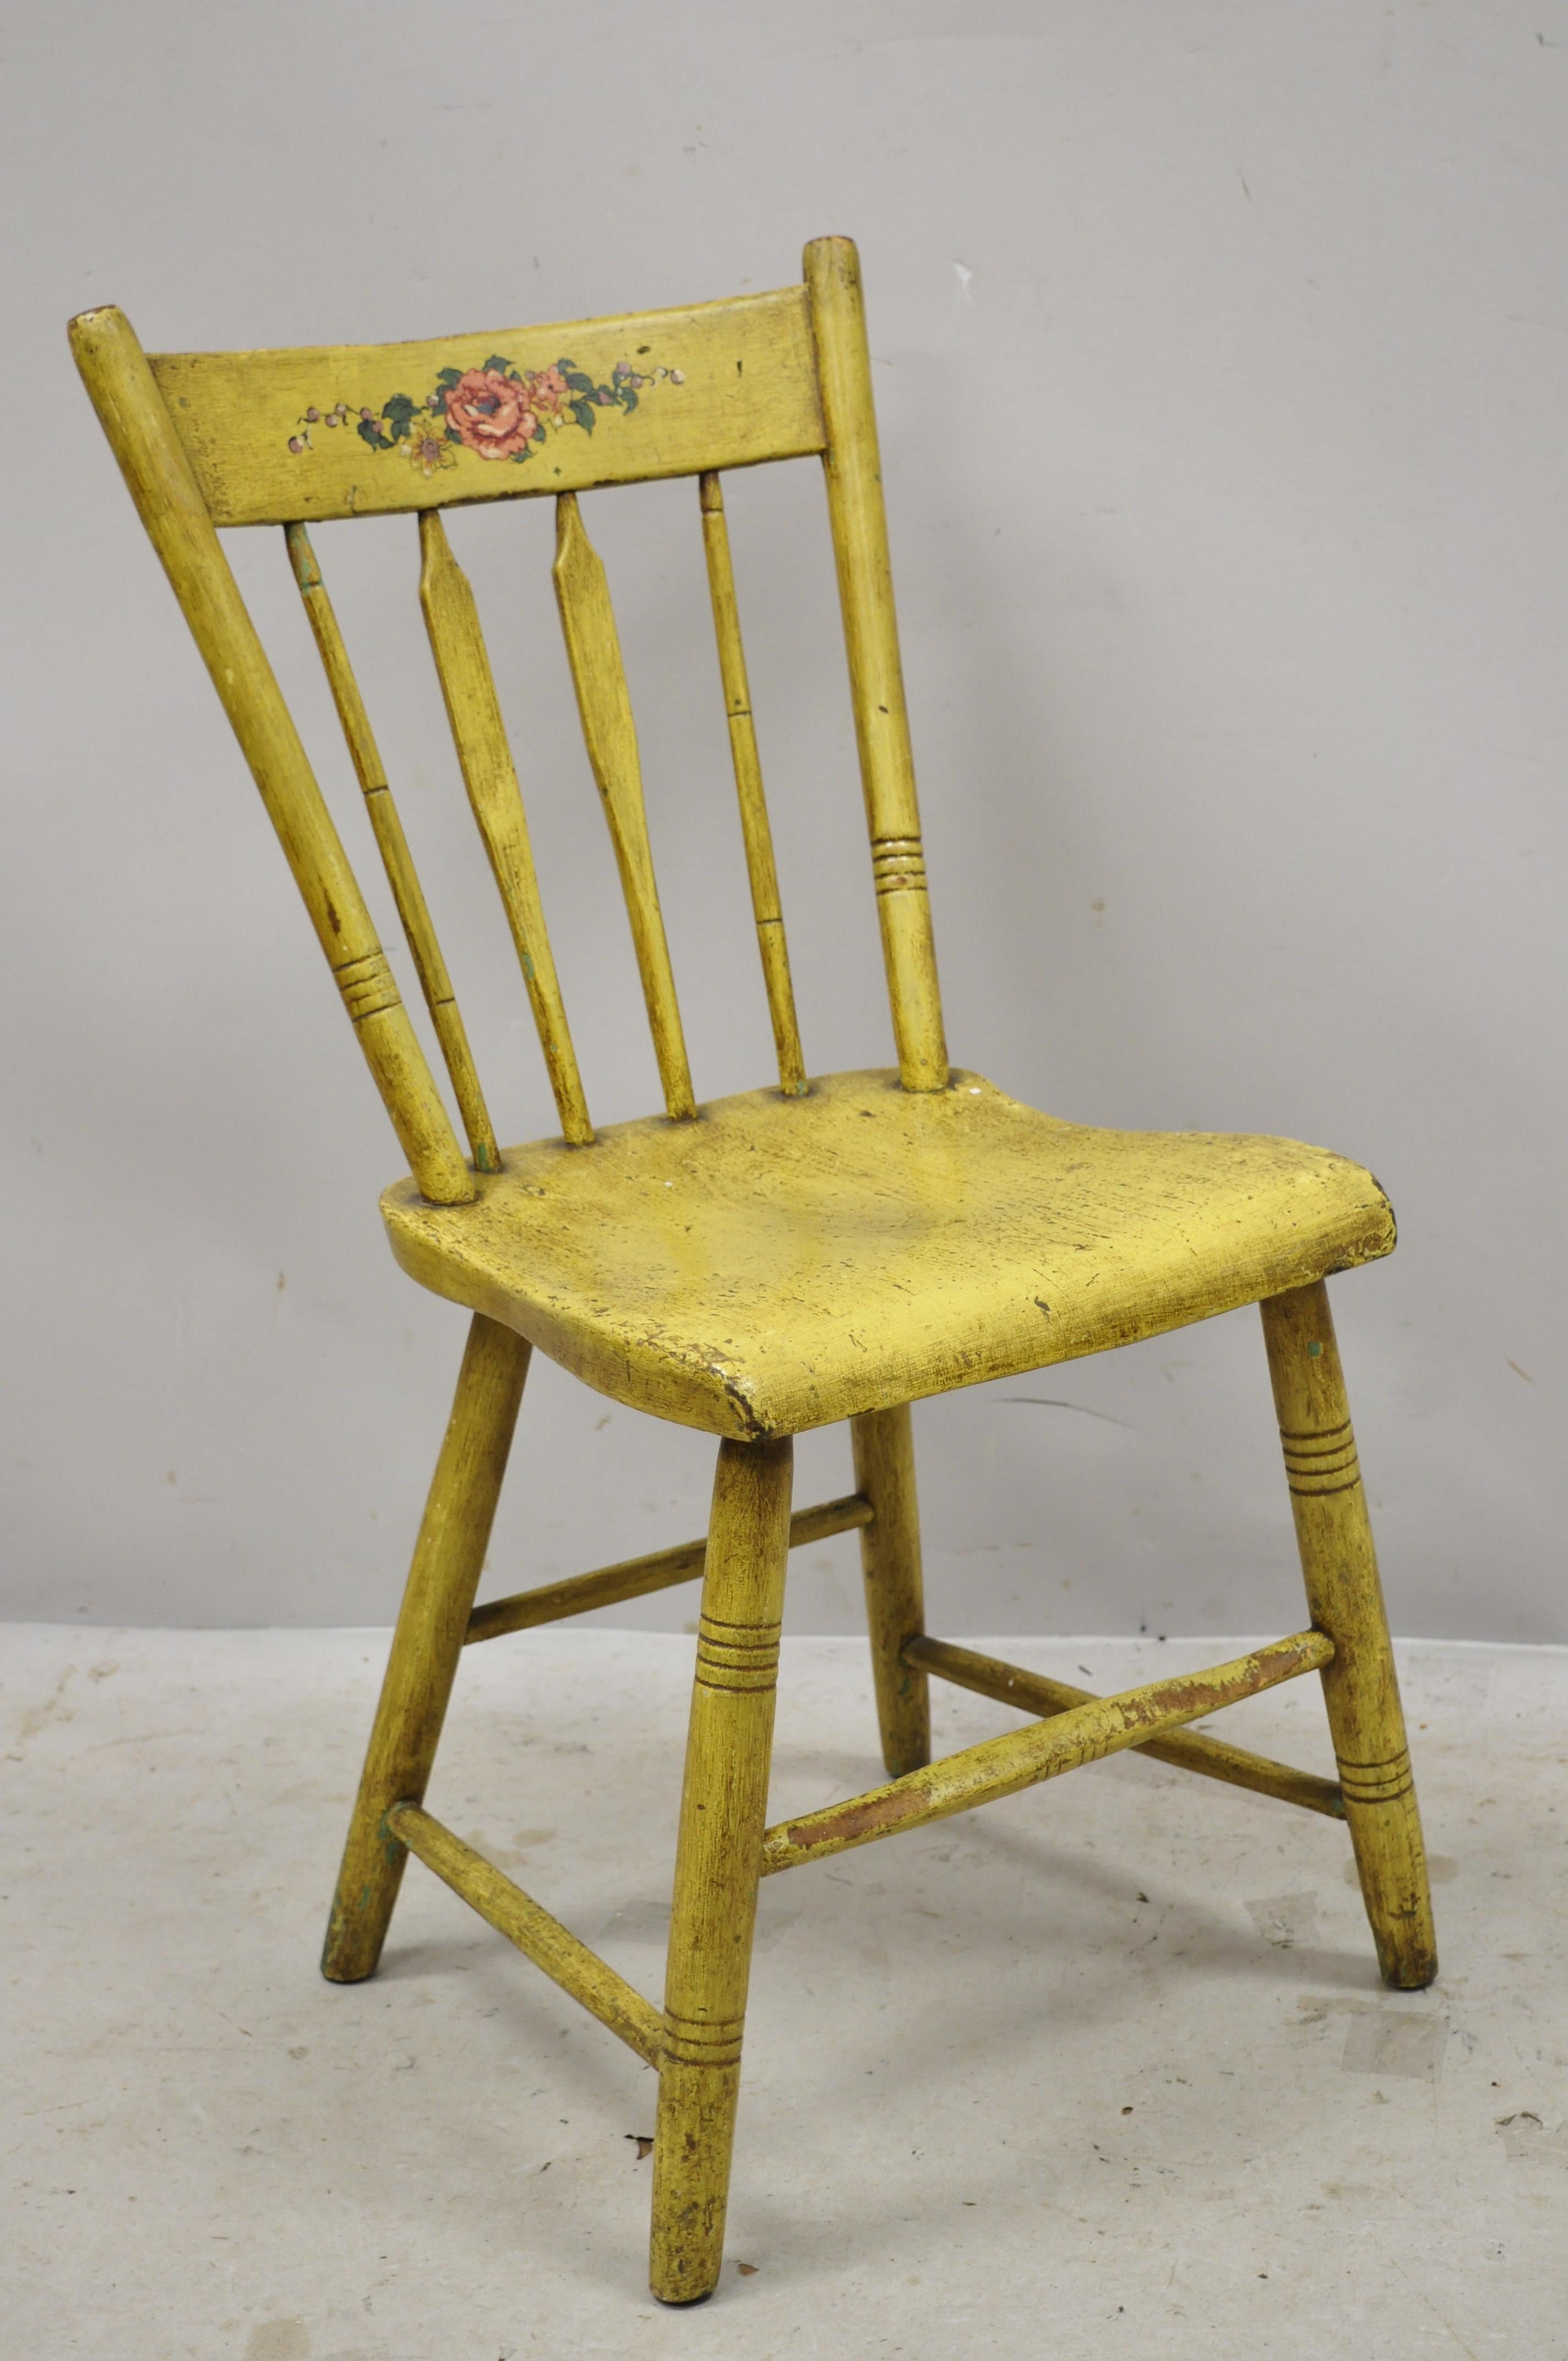 Antique Frederick Loeser & Co yellow American primitive Hitchcock style painted side chair (A). Item features floral painted backrest, spindle back, carved stretcher base, remarkable patina, solid wood frames, yellow distressed finish, very nice